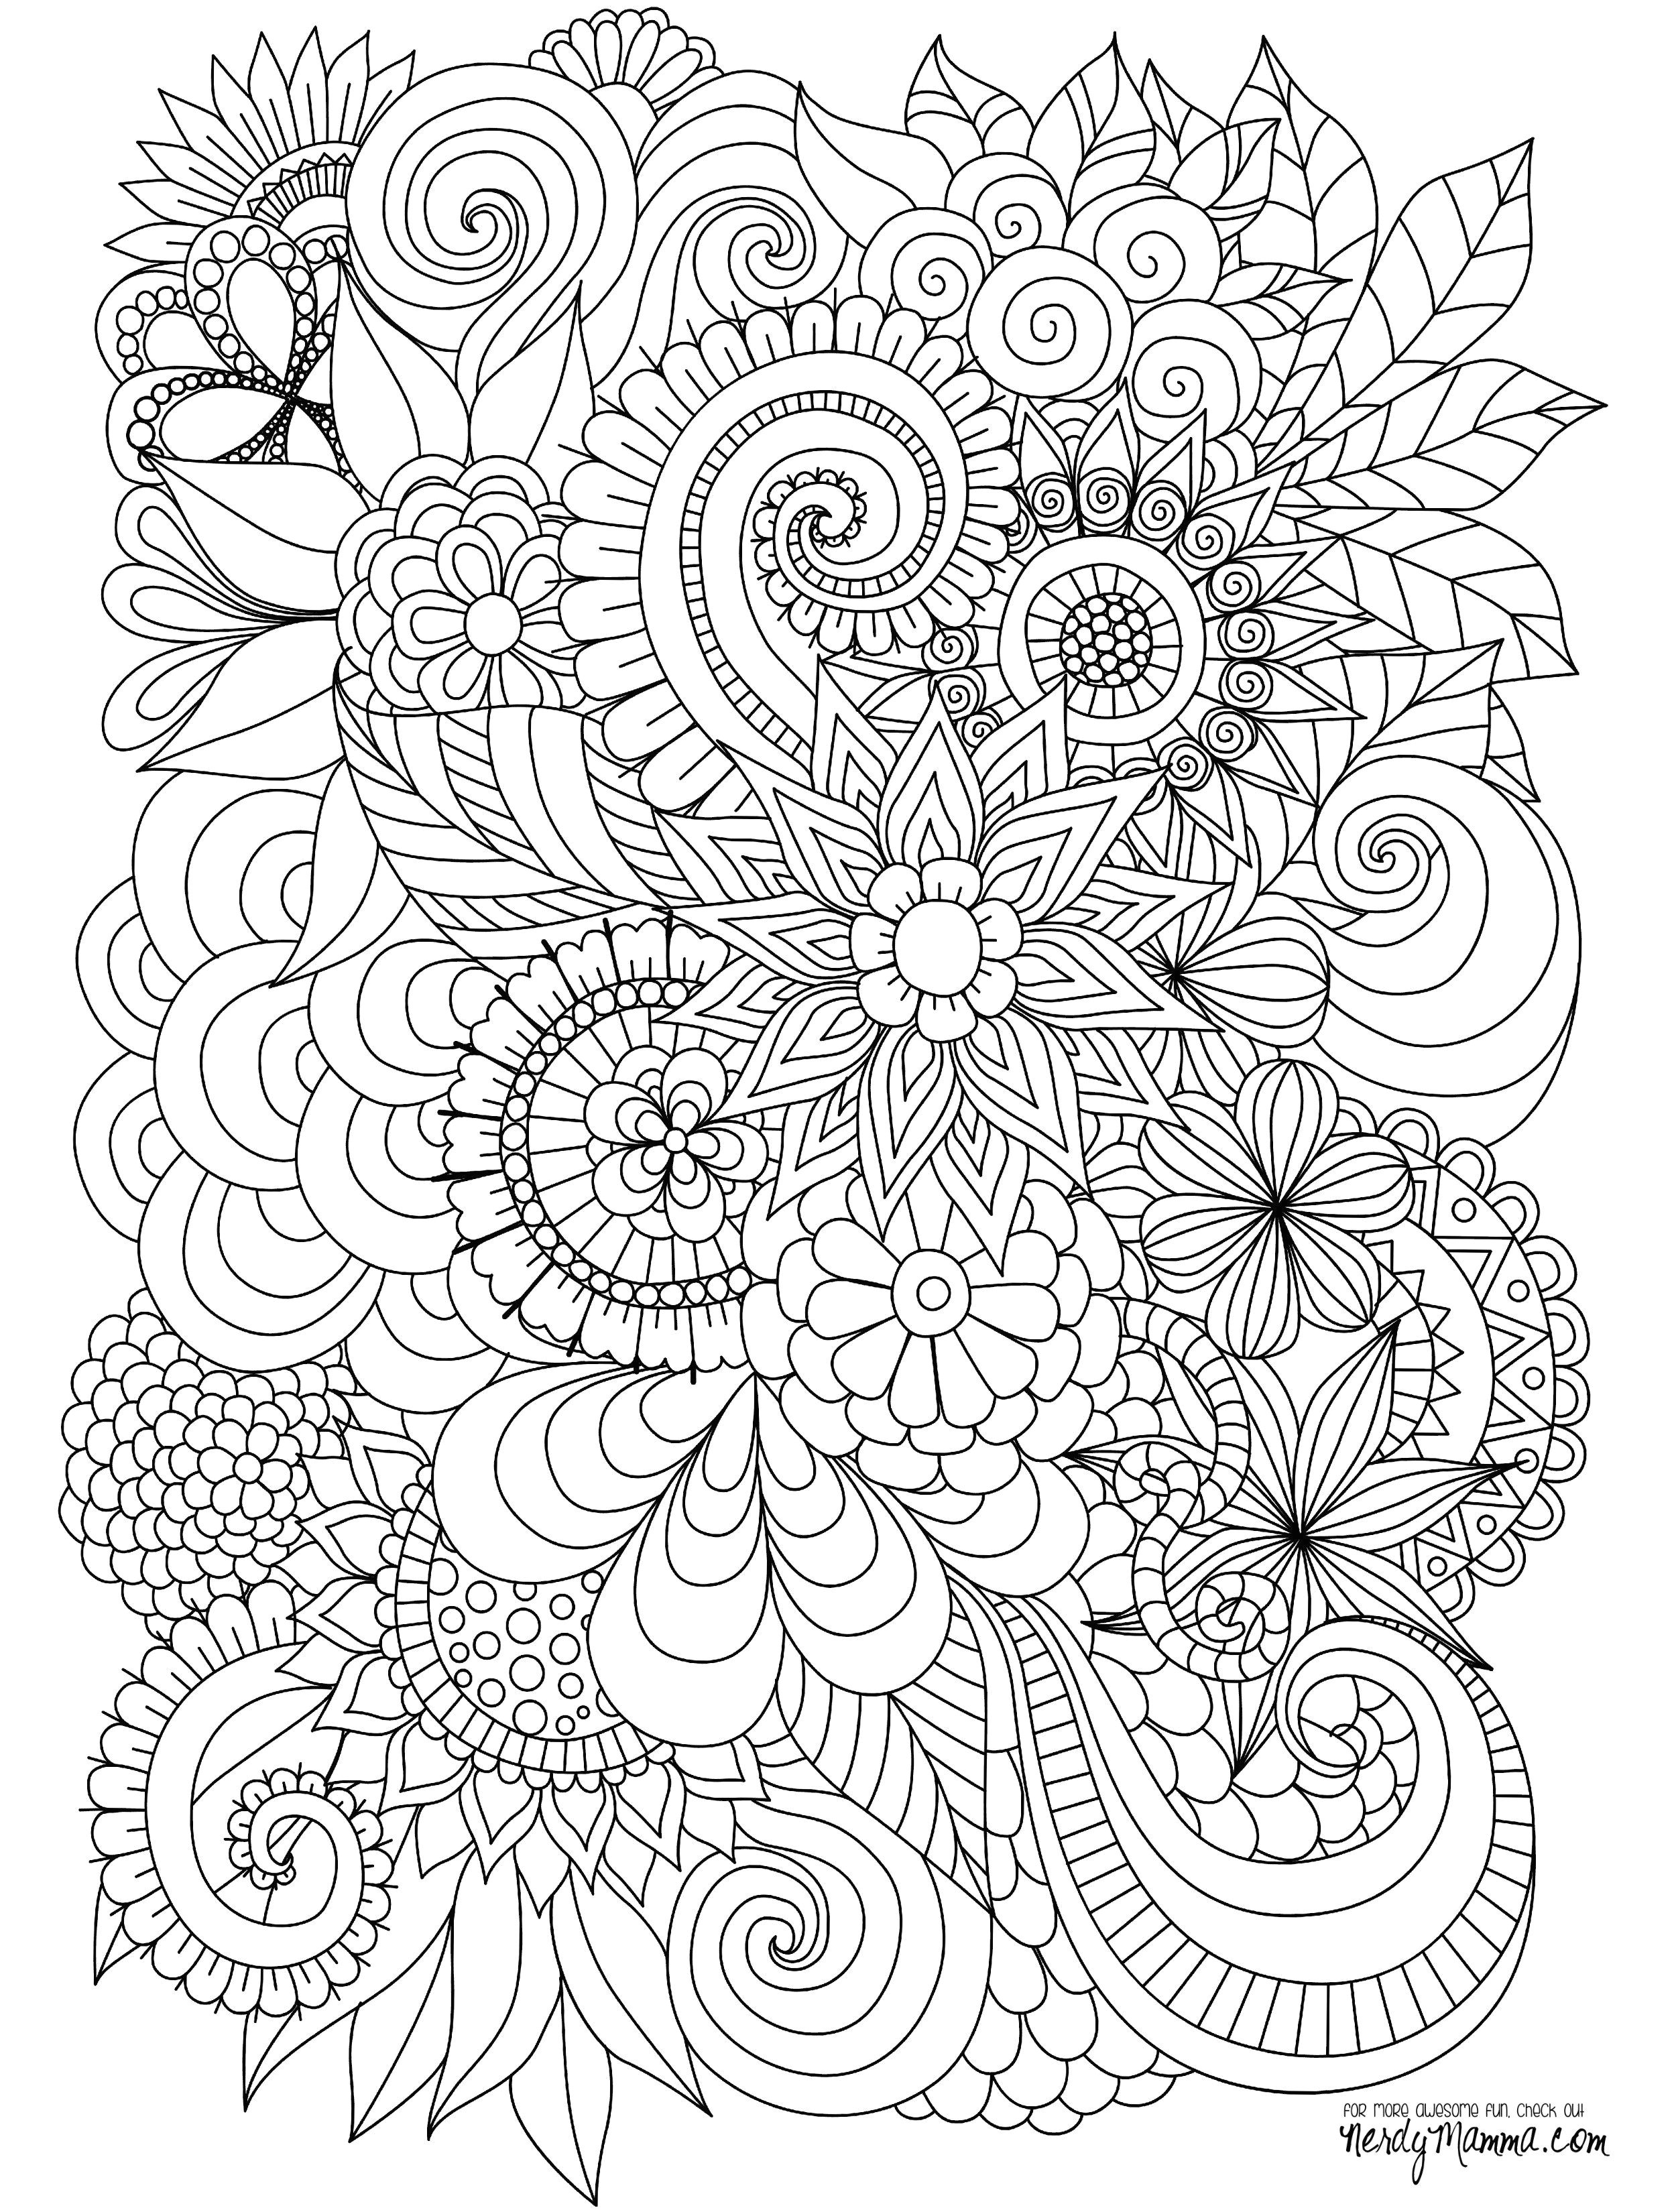 Drawings Of Flowers to Copy Flowers Abstract Coloring Pages Colouring Adult Detailed Advanced